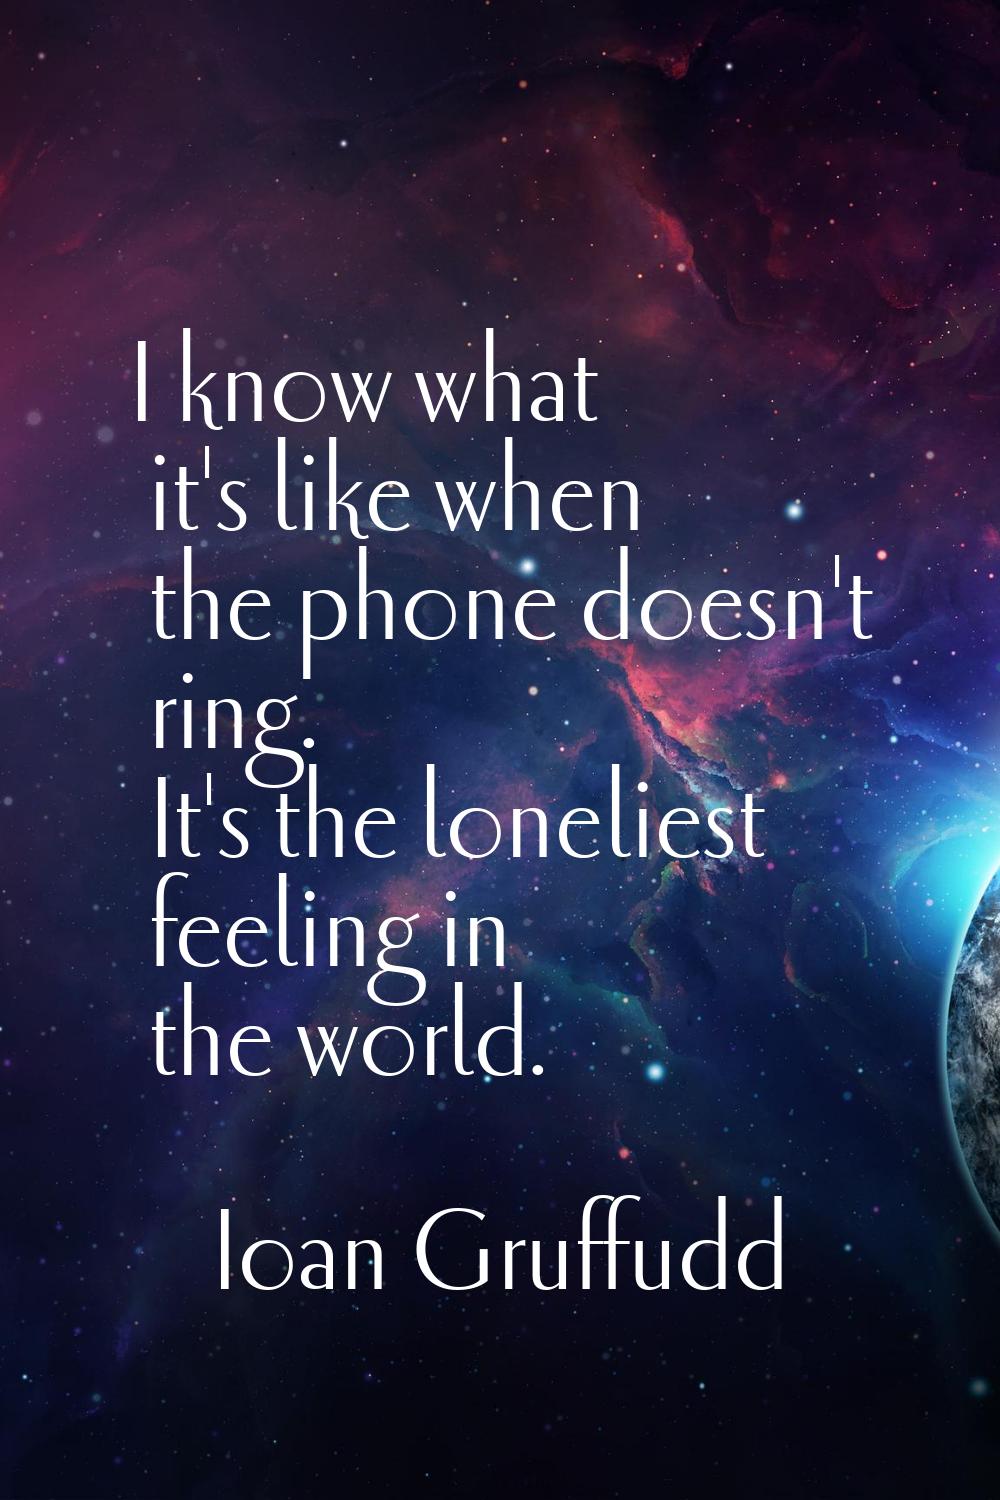 I know what it's like when the phone doesn't ring. It's the loneliest feeling in the world.